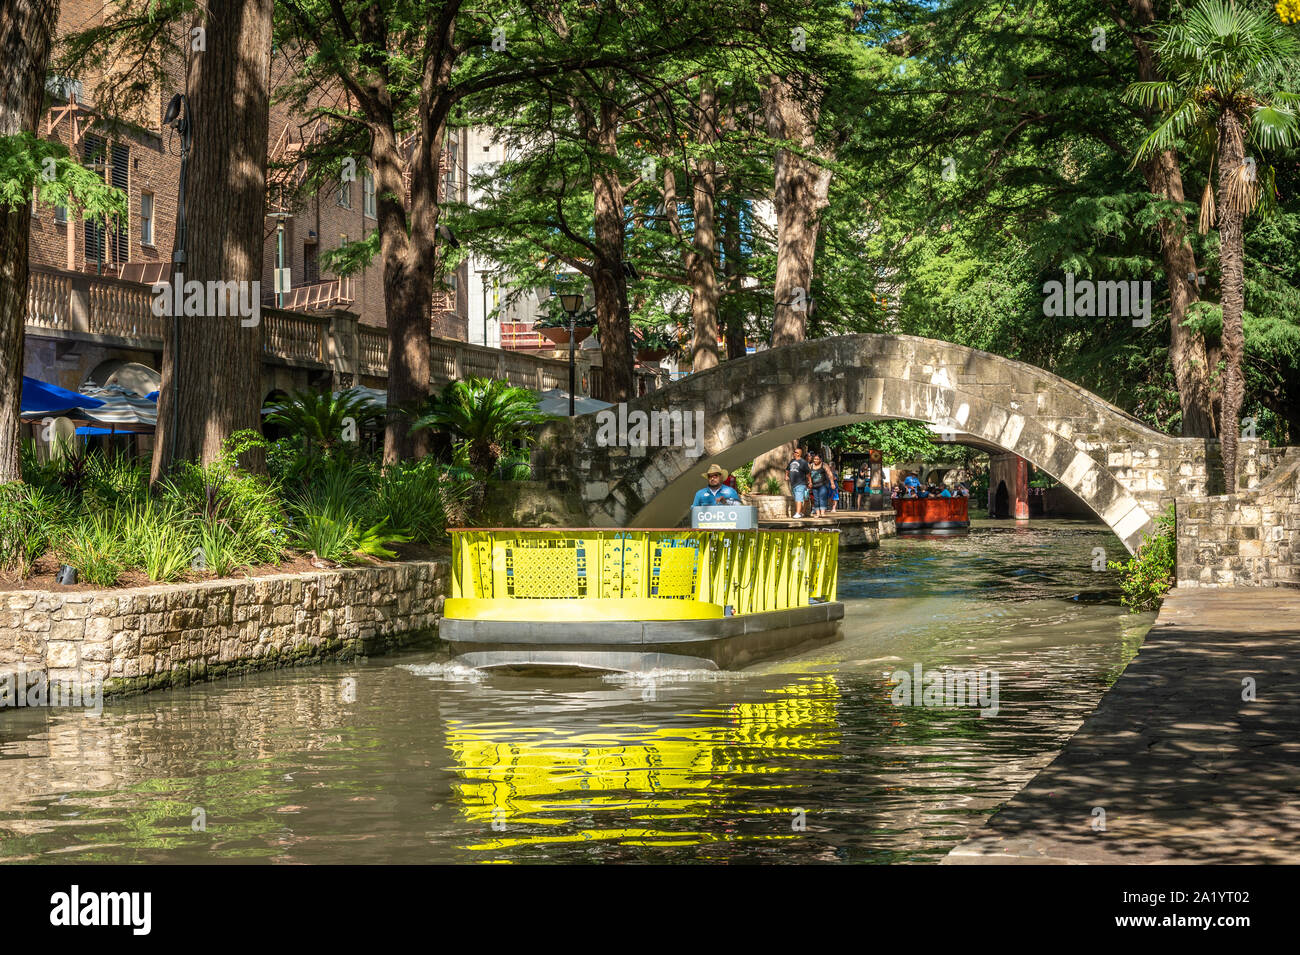 Boats ferry tourists up and down the Riverwalk, San Antonio, Texas. Stock Photo